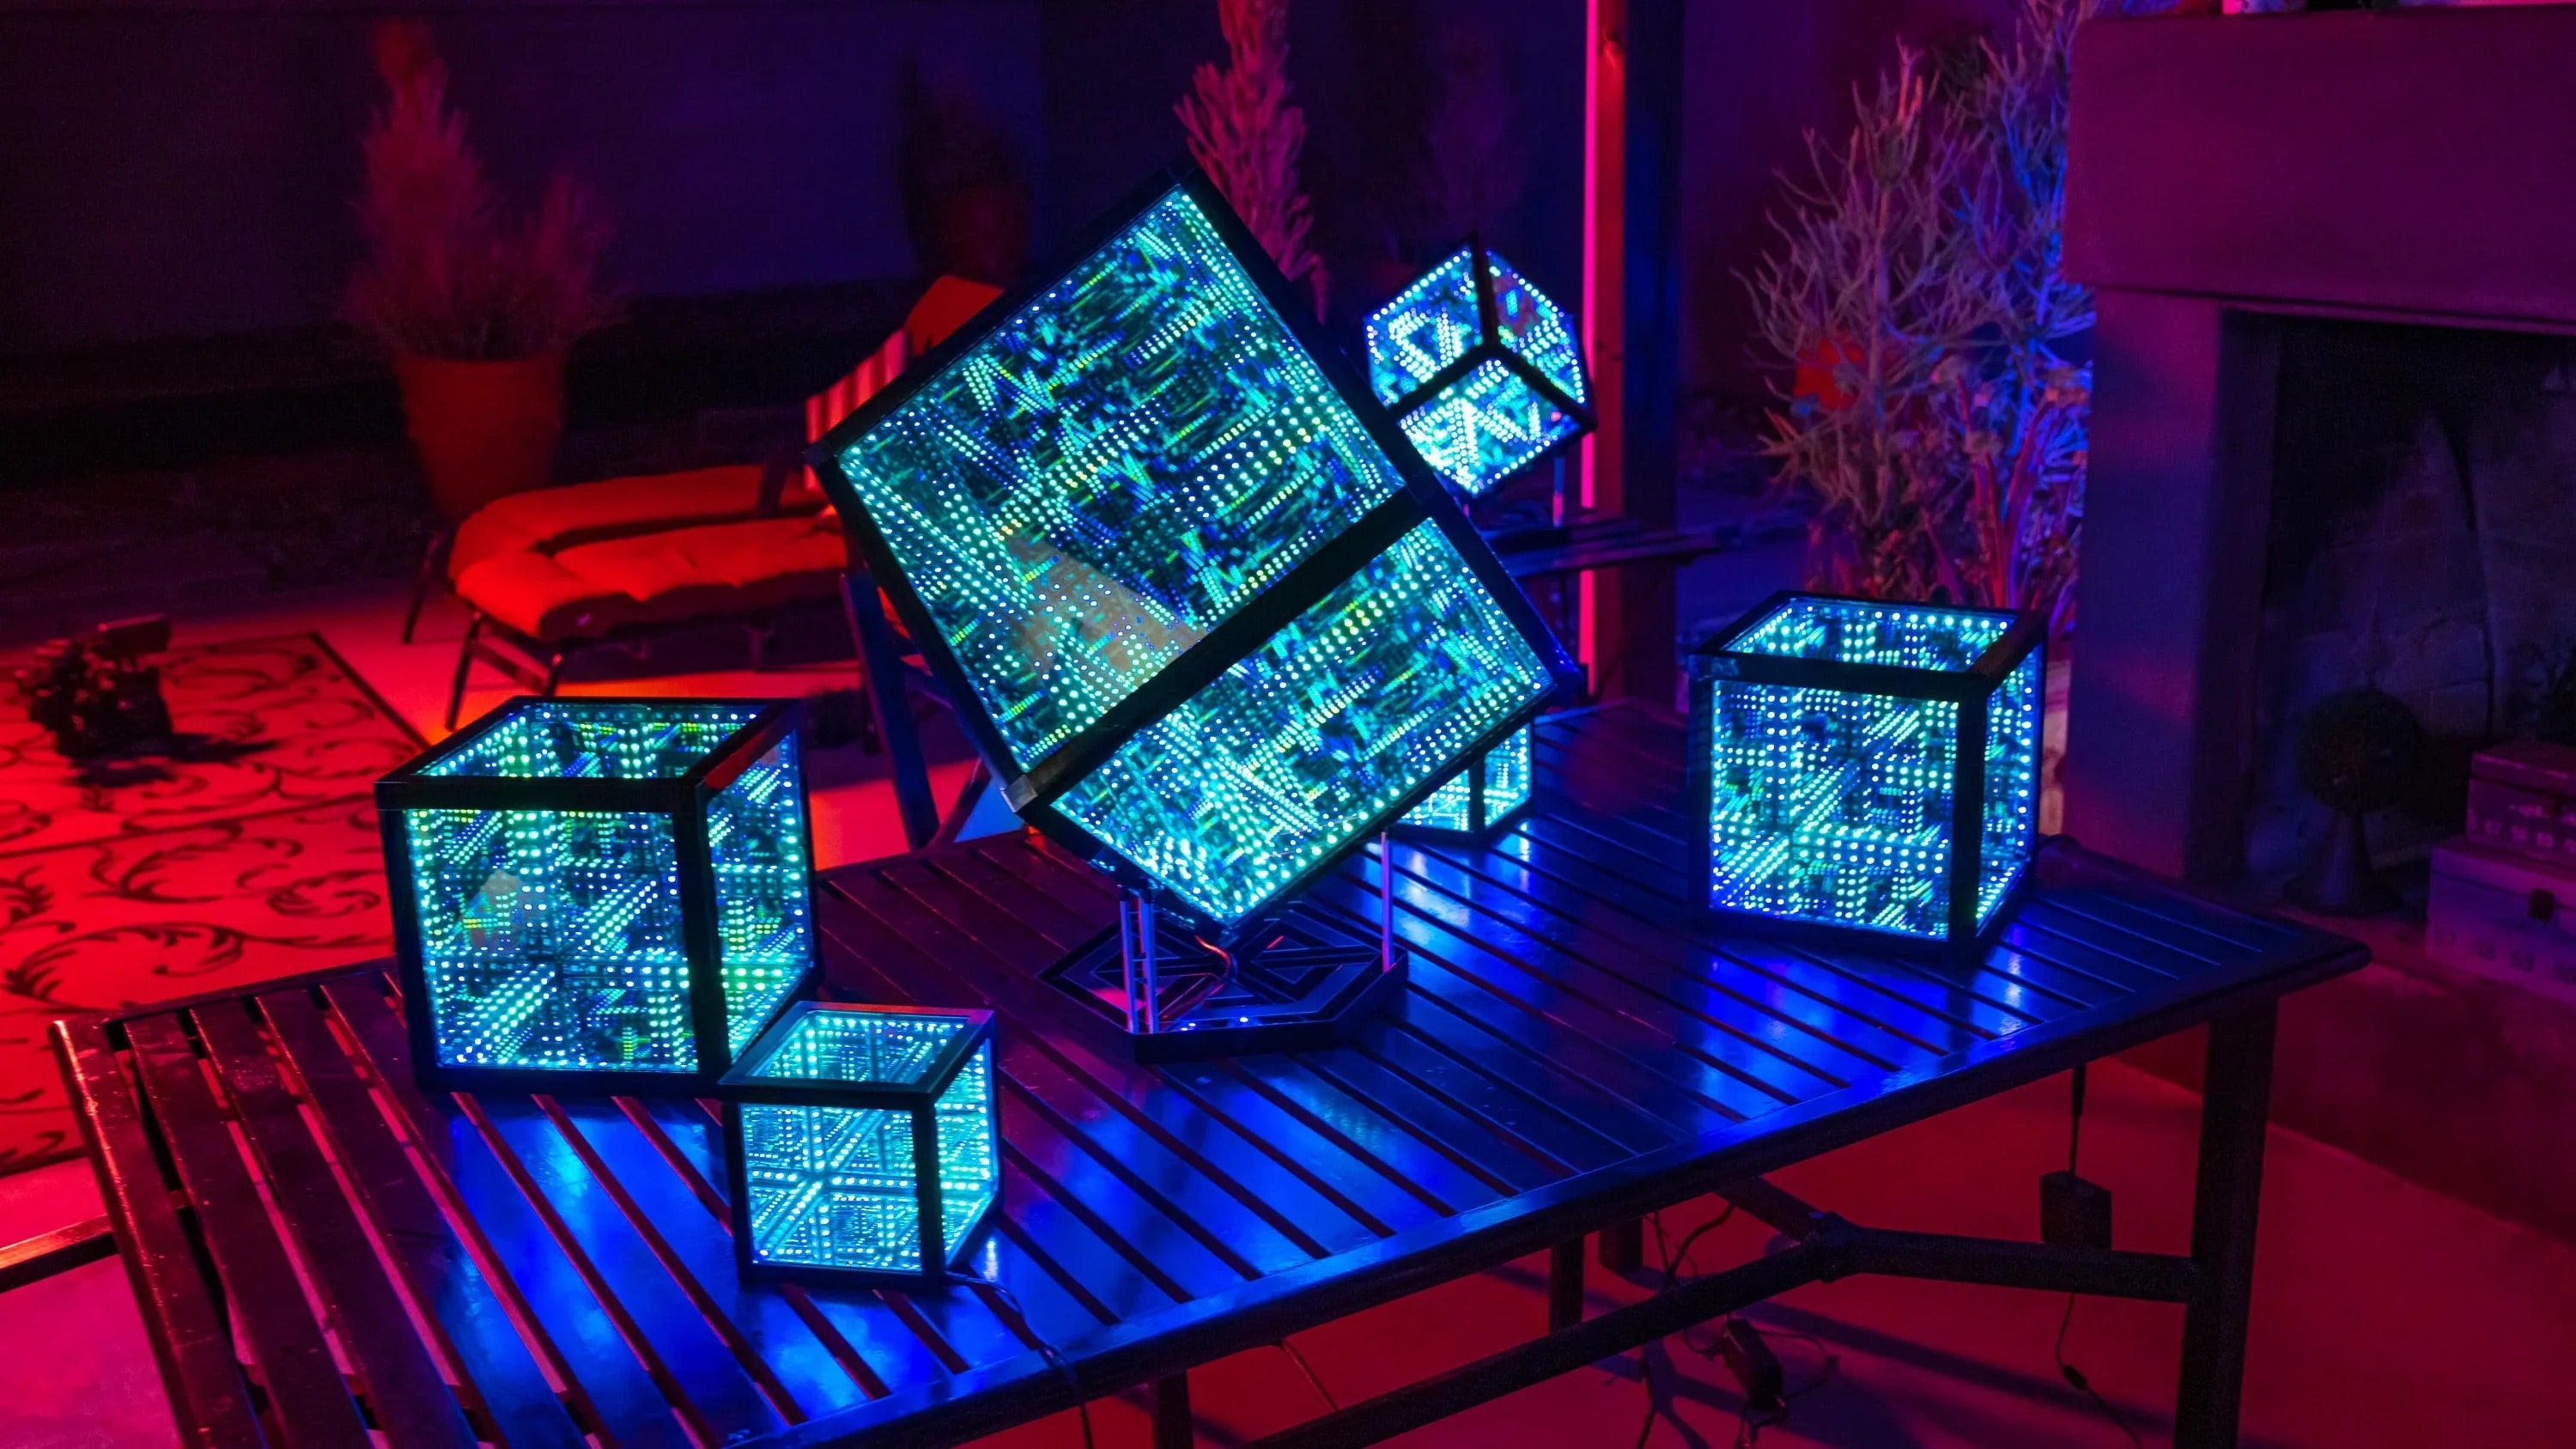 Five cubes with ambient room lighting placed on patrio table outside for decor